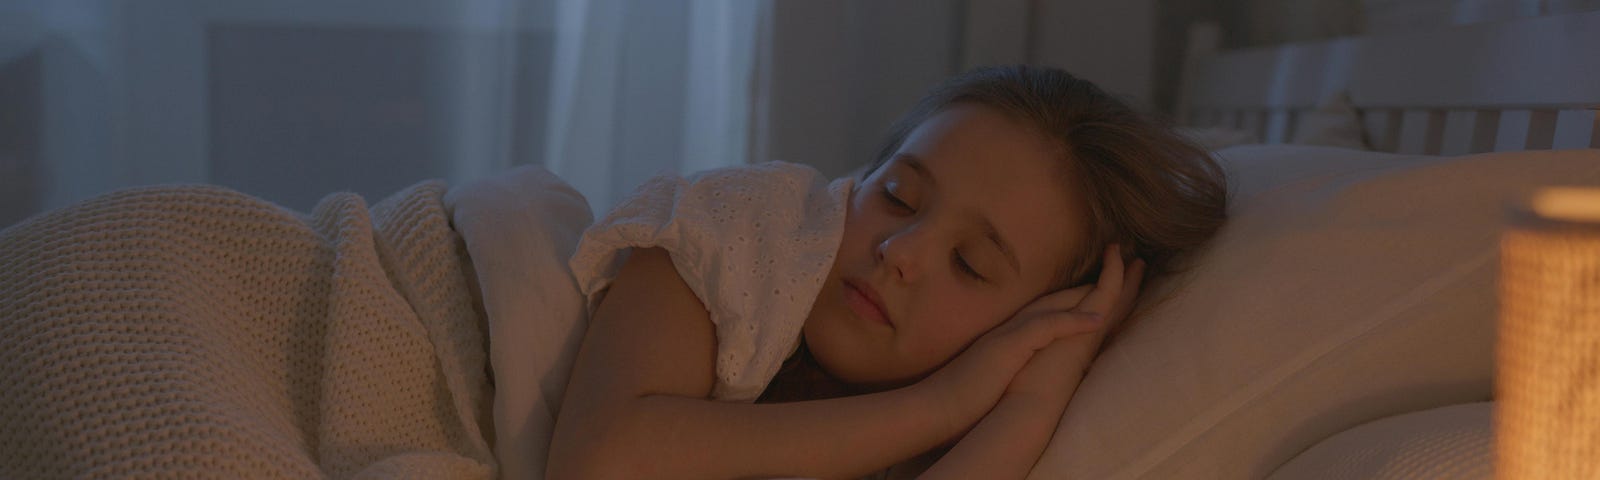 A young girl sleeps in her bed on her side. Her hands are clasped together under her head.